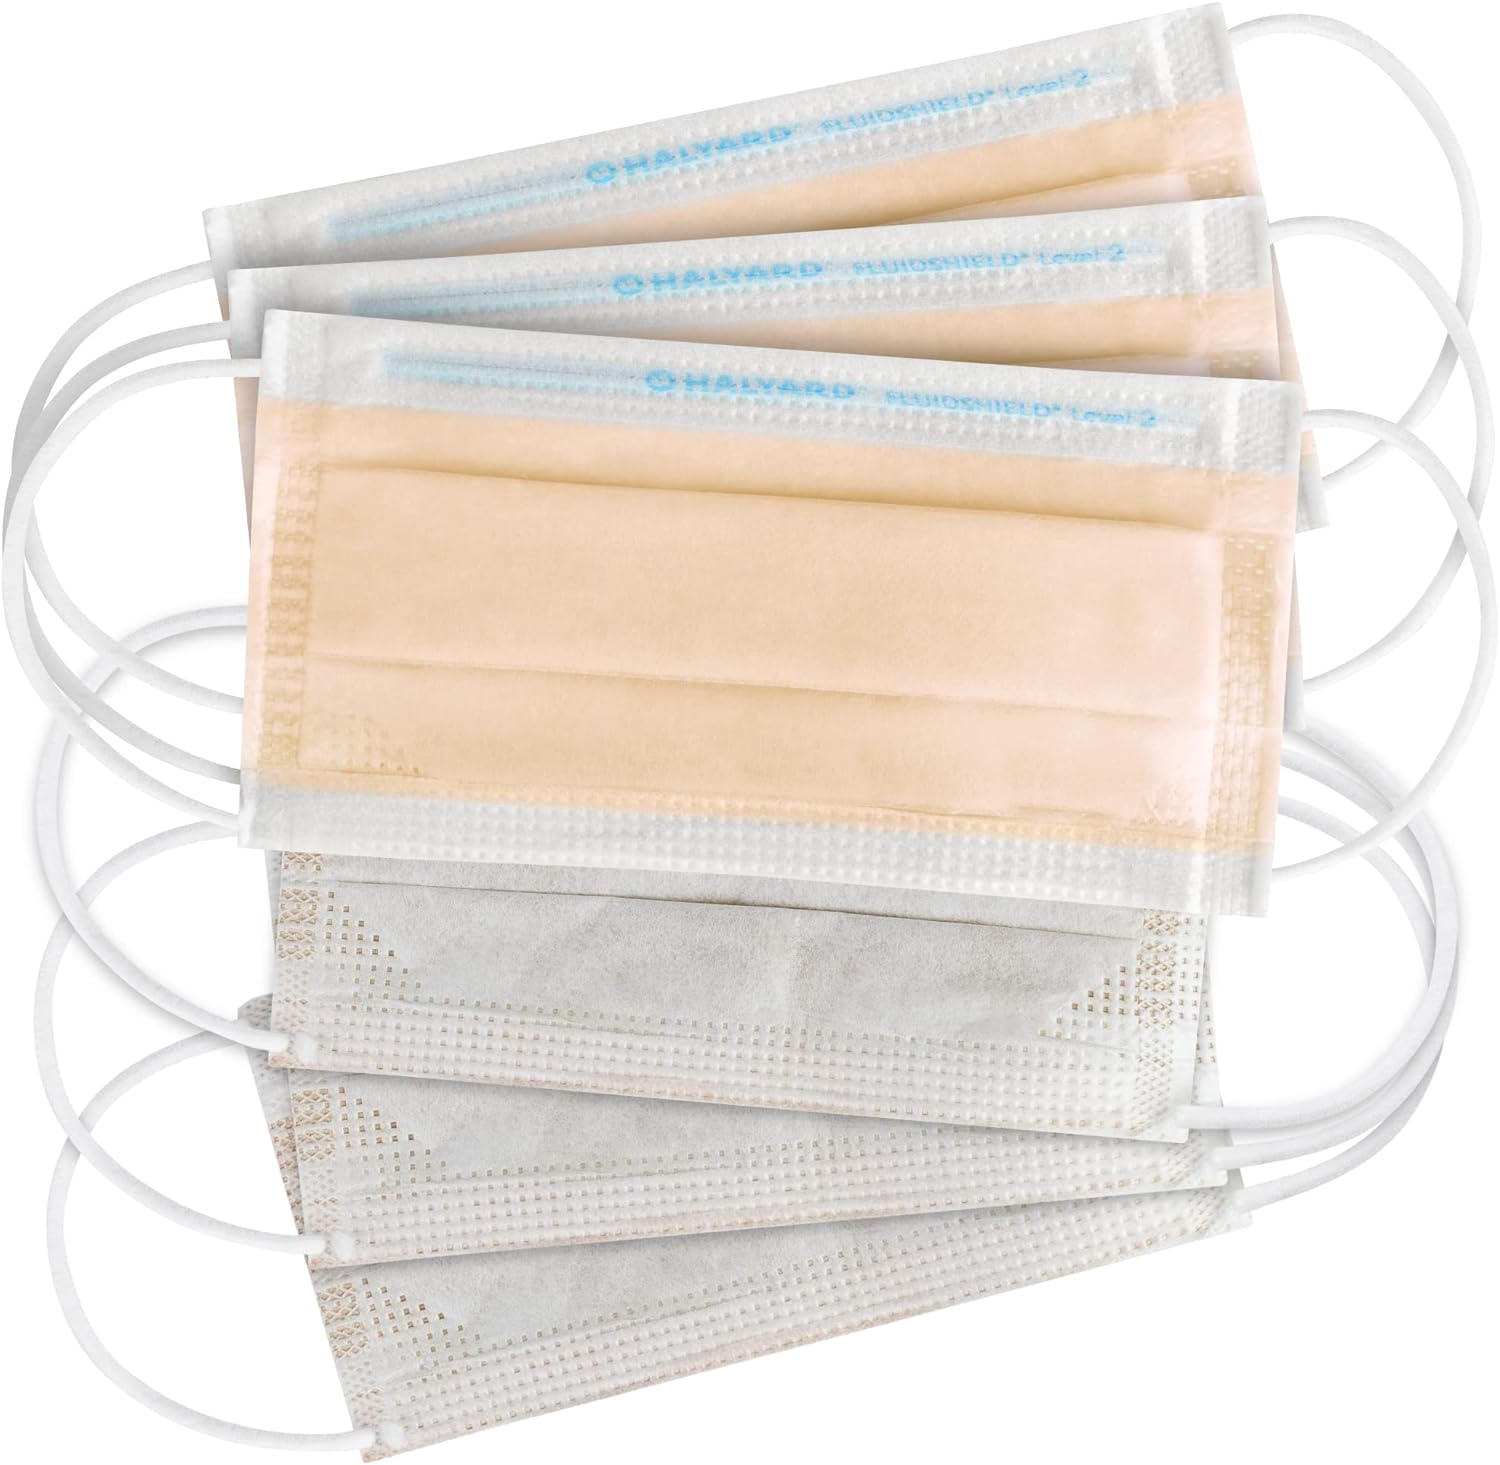 Halyard Fluidshield Level 3 Disposable Face Mask - Box Of 40 - So Soft Lining/Earloop - America